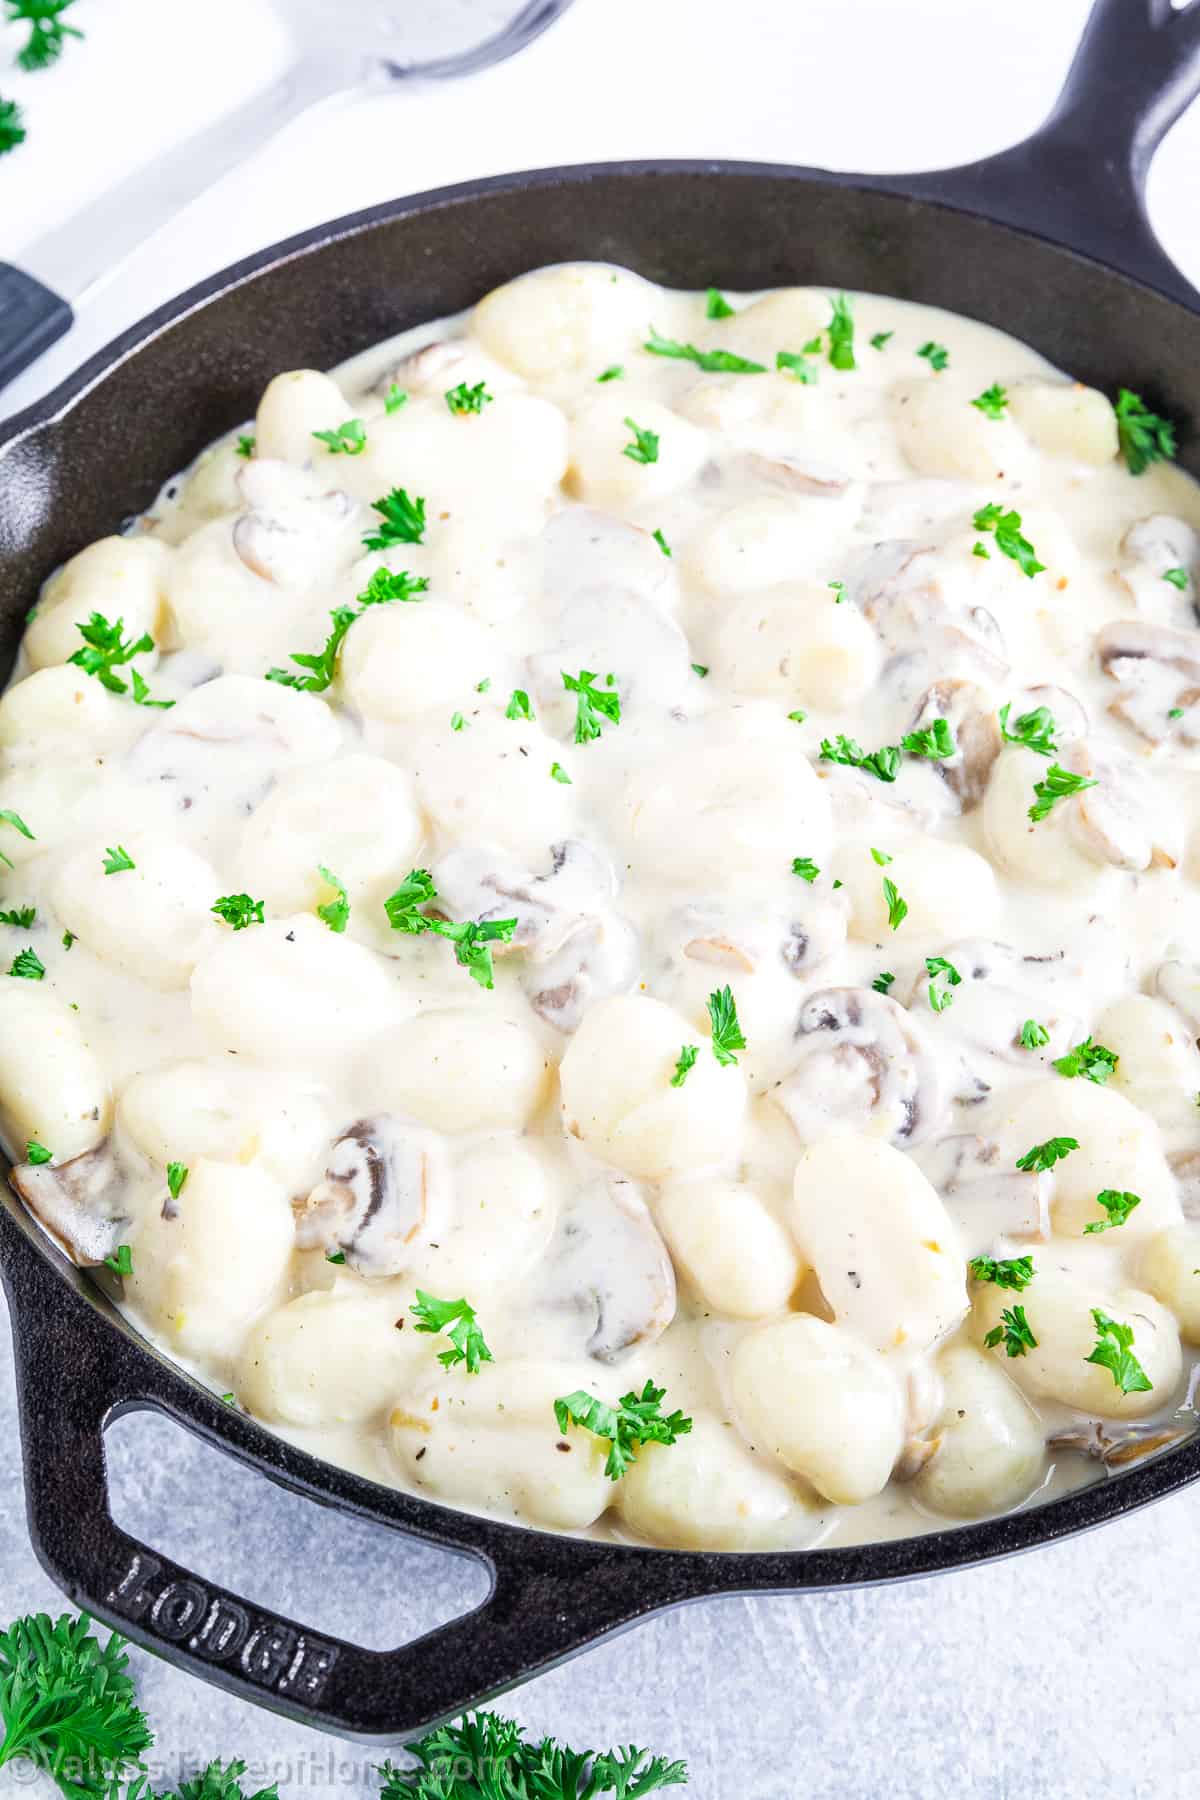 The combination of pillowy gnocchi, creamy sauce, and the earthy flavors of various mushrooms make this a rich and velvety dish that's guaranteed to become a family favorite.